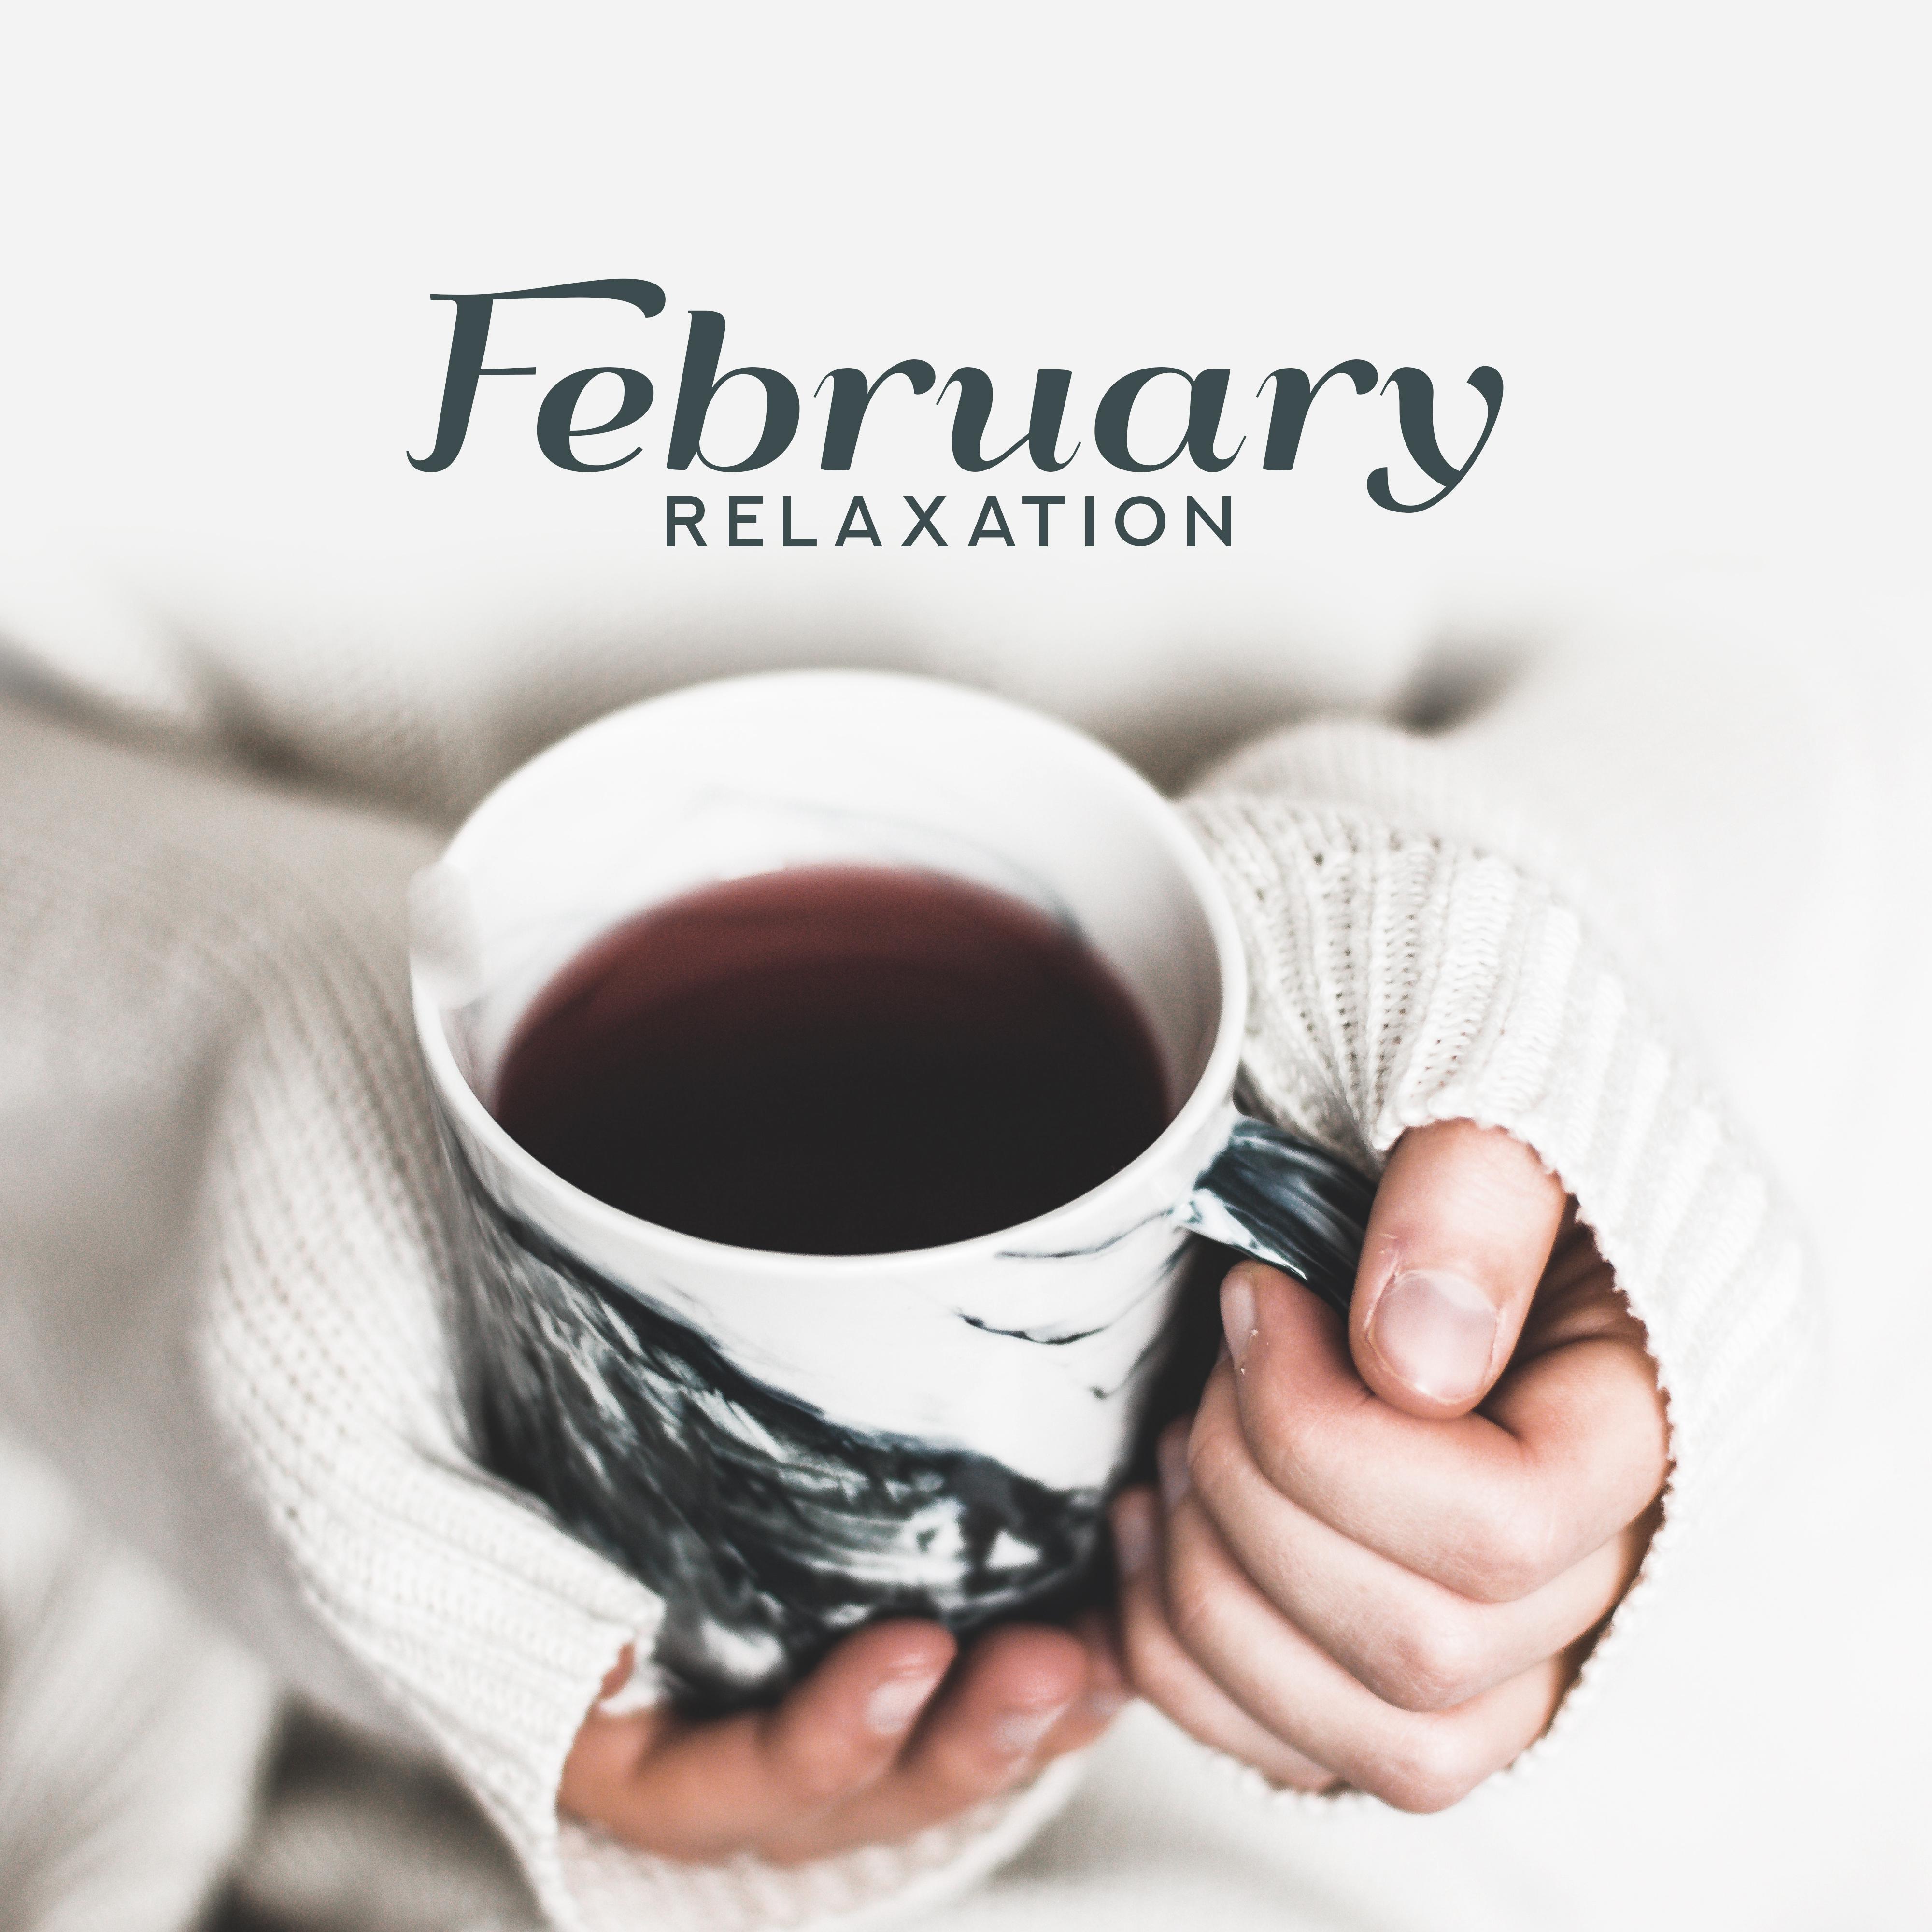 February Relaxation – Chill Out 2019, Smooth Music to Calm Down, Pure Mind, Soothing Chill Out, Zero Stress